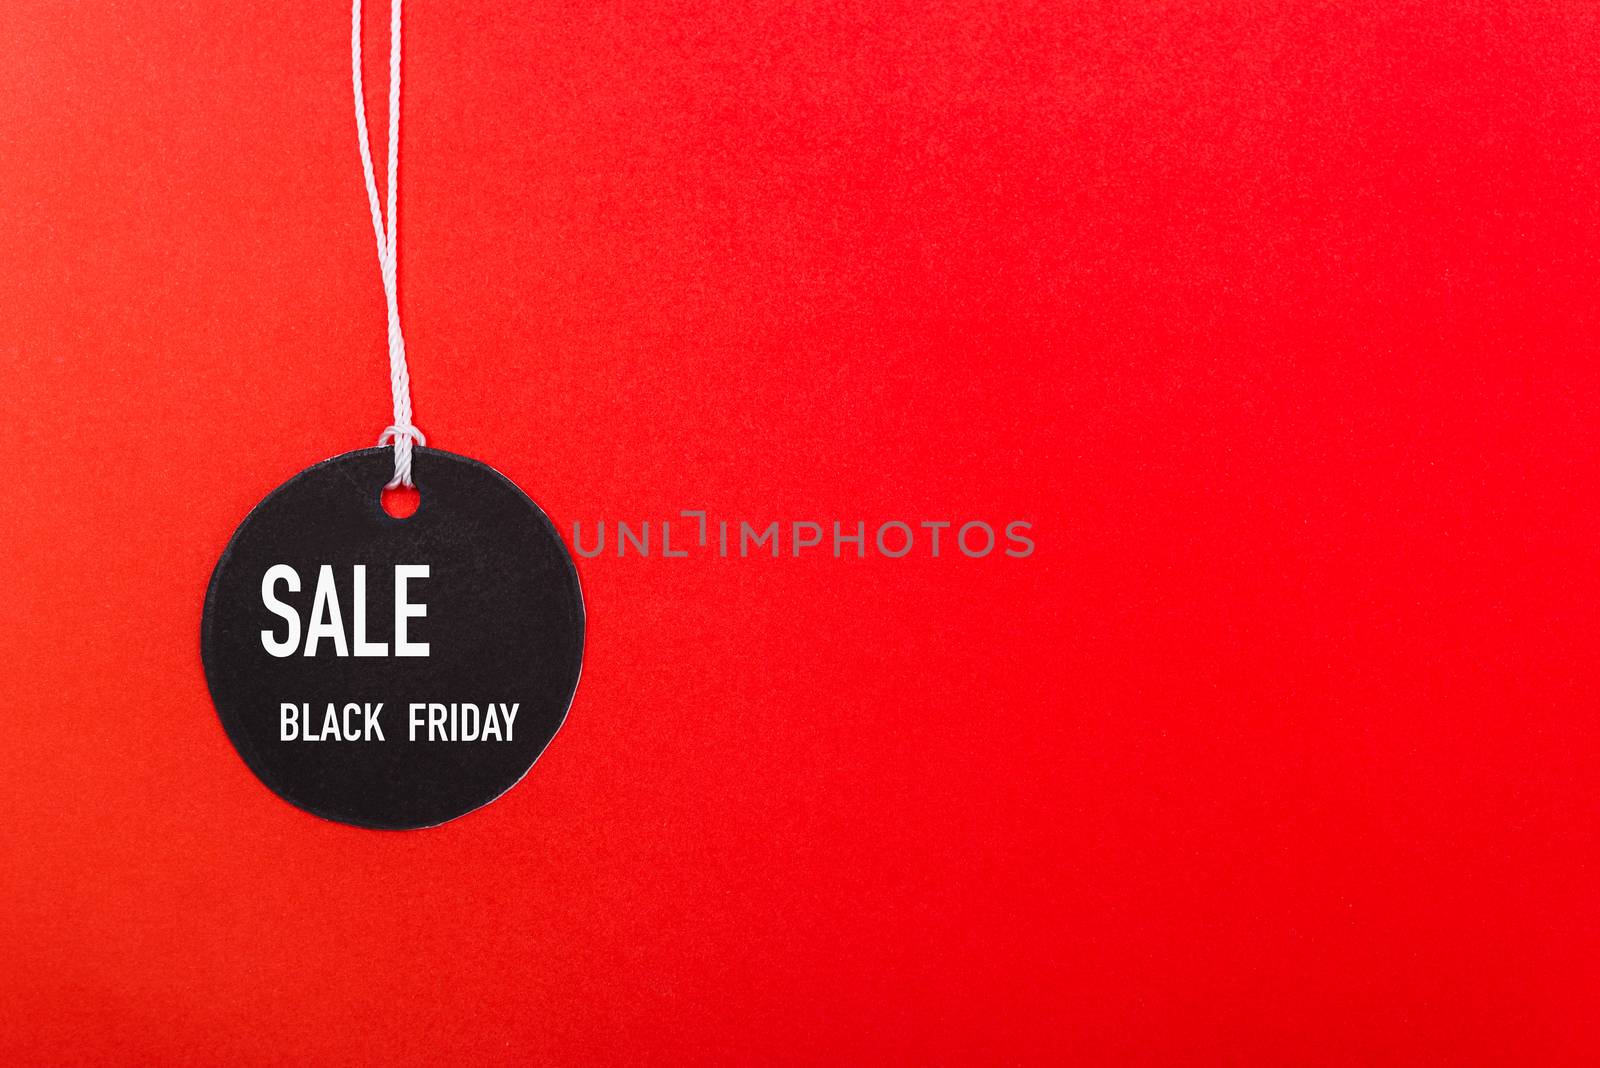 Online shopping Black Friday sale text on Circle Black tag label by Sorapop